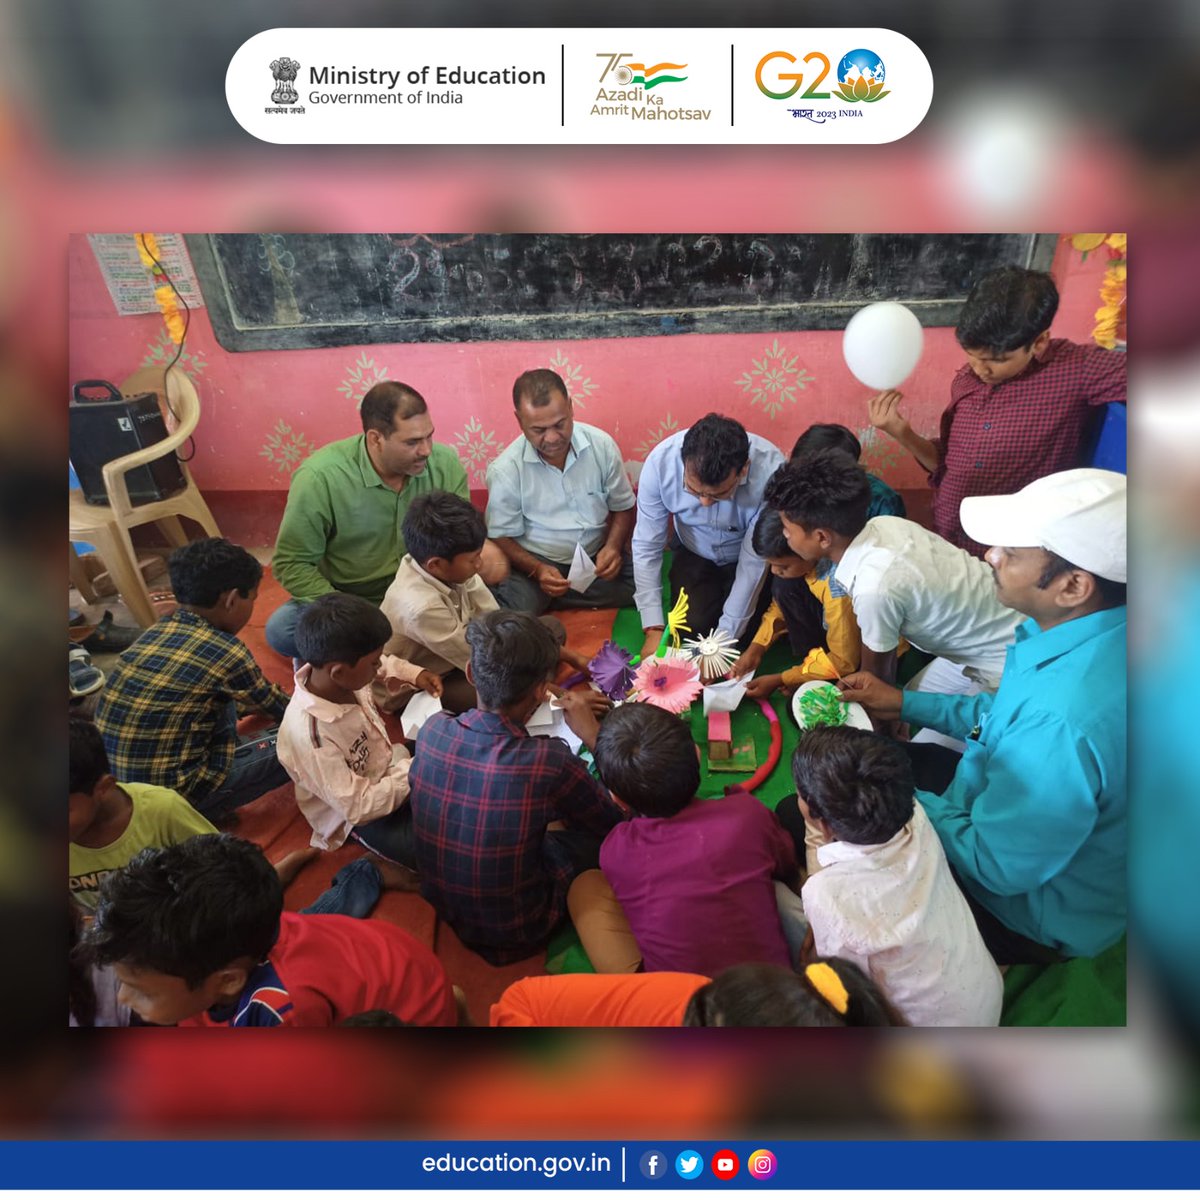 #G20India: Uttar Pradesh's participation in the #G20janbhdari event commenced with lively Summer Camps held in various schools across the state.